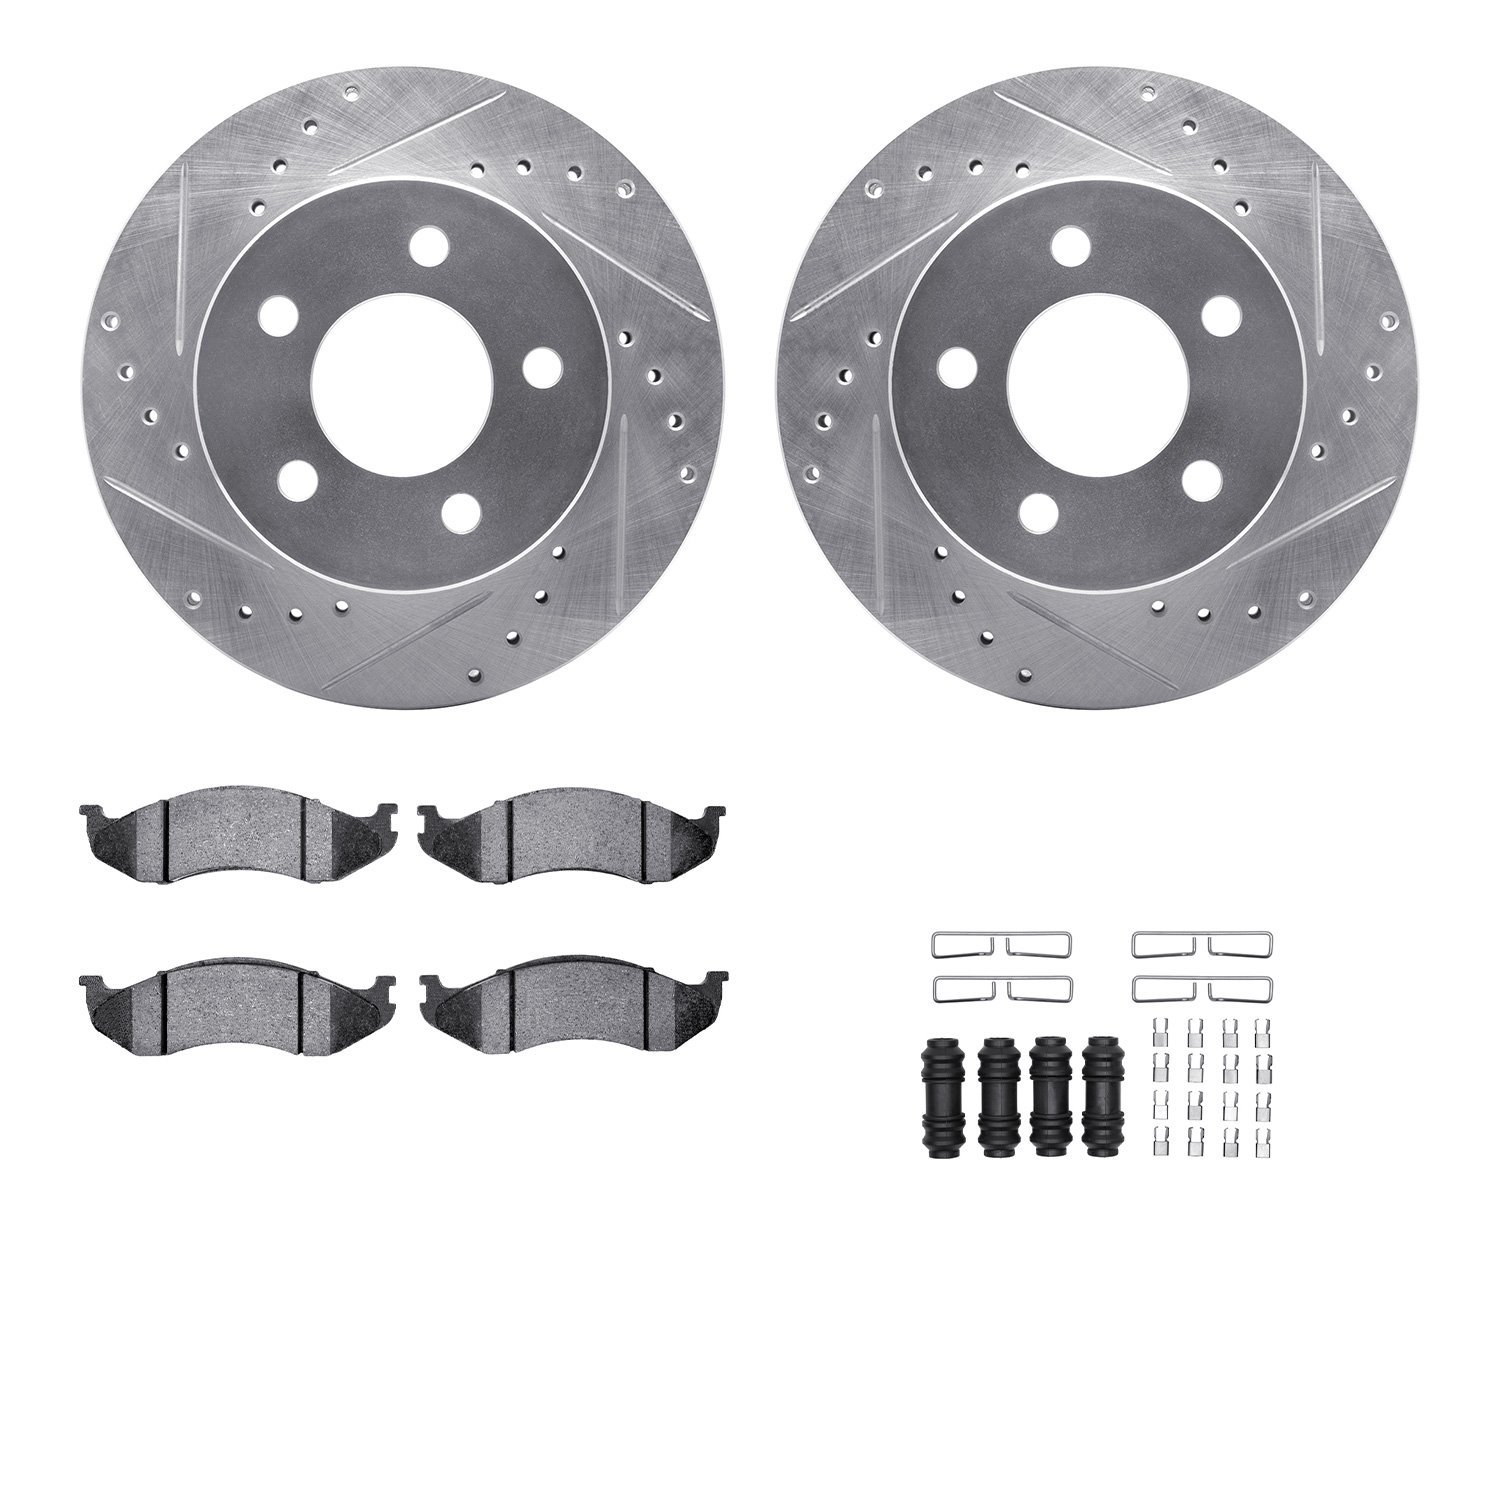 7412-42029 Drilled/Slotted Brake Rotors with Ultimate-Duty Brake Pads Kit & Hardware [Silver], 1990-1999 Mopar, Position: Front